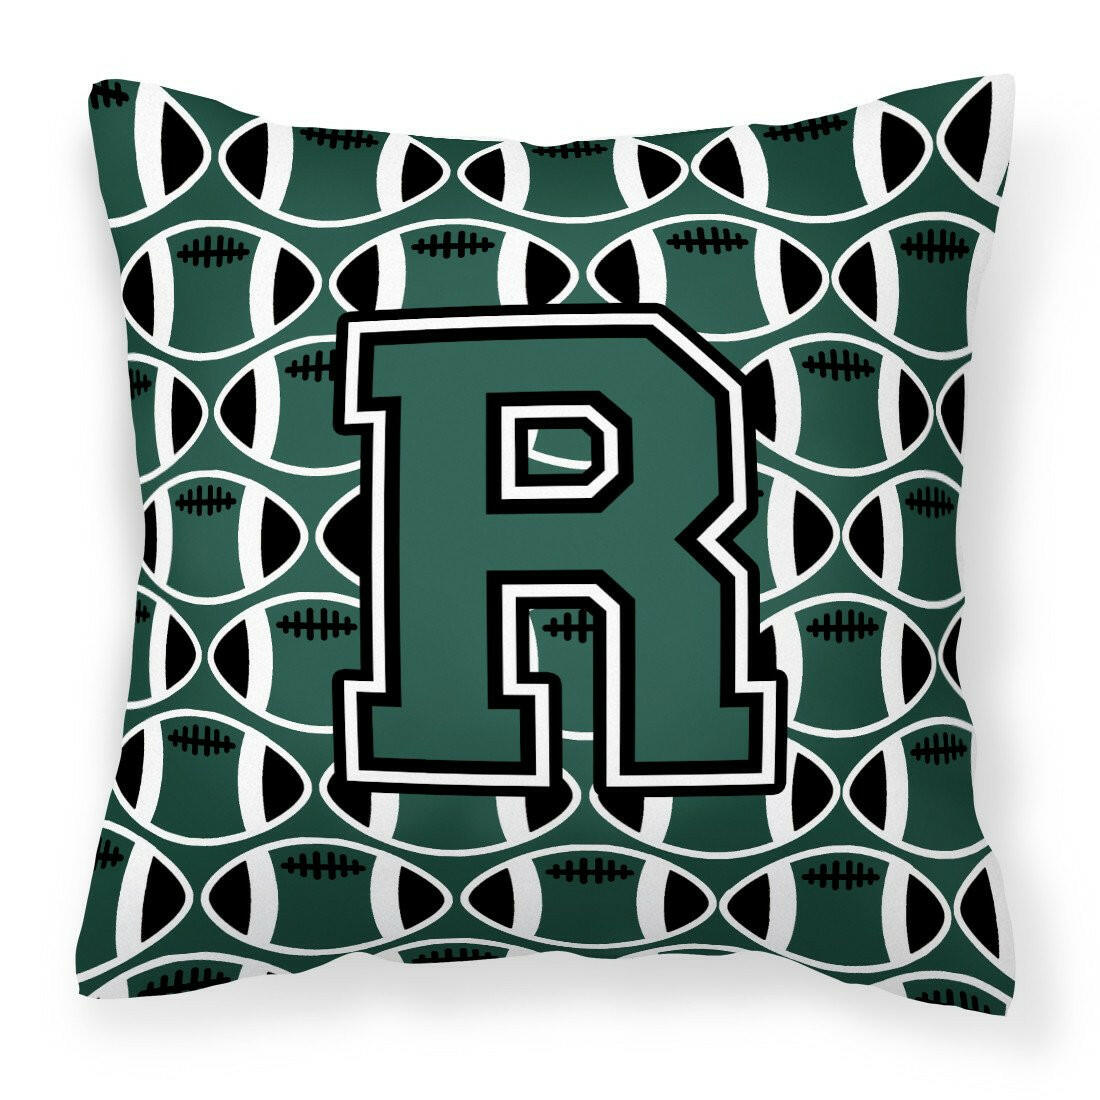 Letter R Football Green and White Fabric Decorative Pillow CJ1071-RPW1414 by Caroline's Treasures